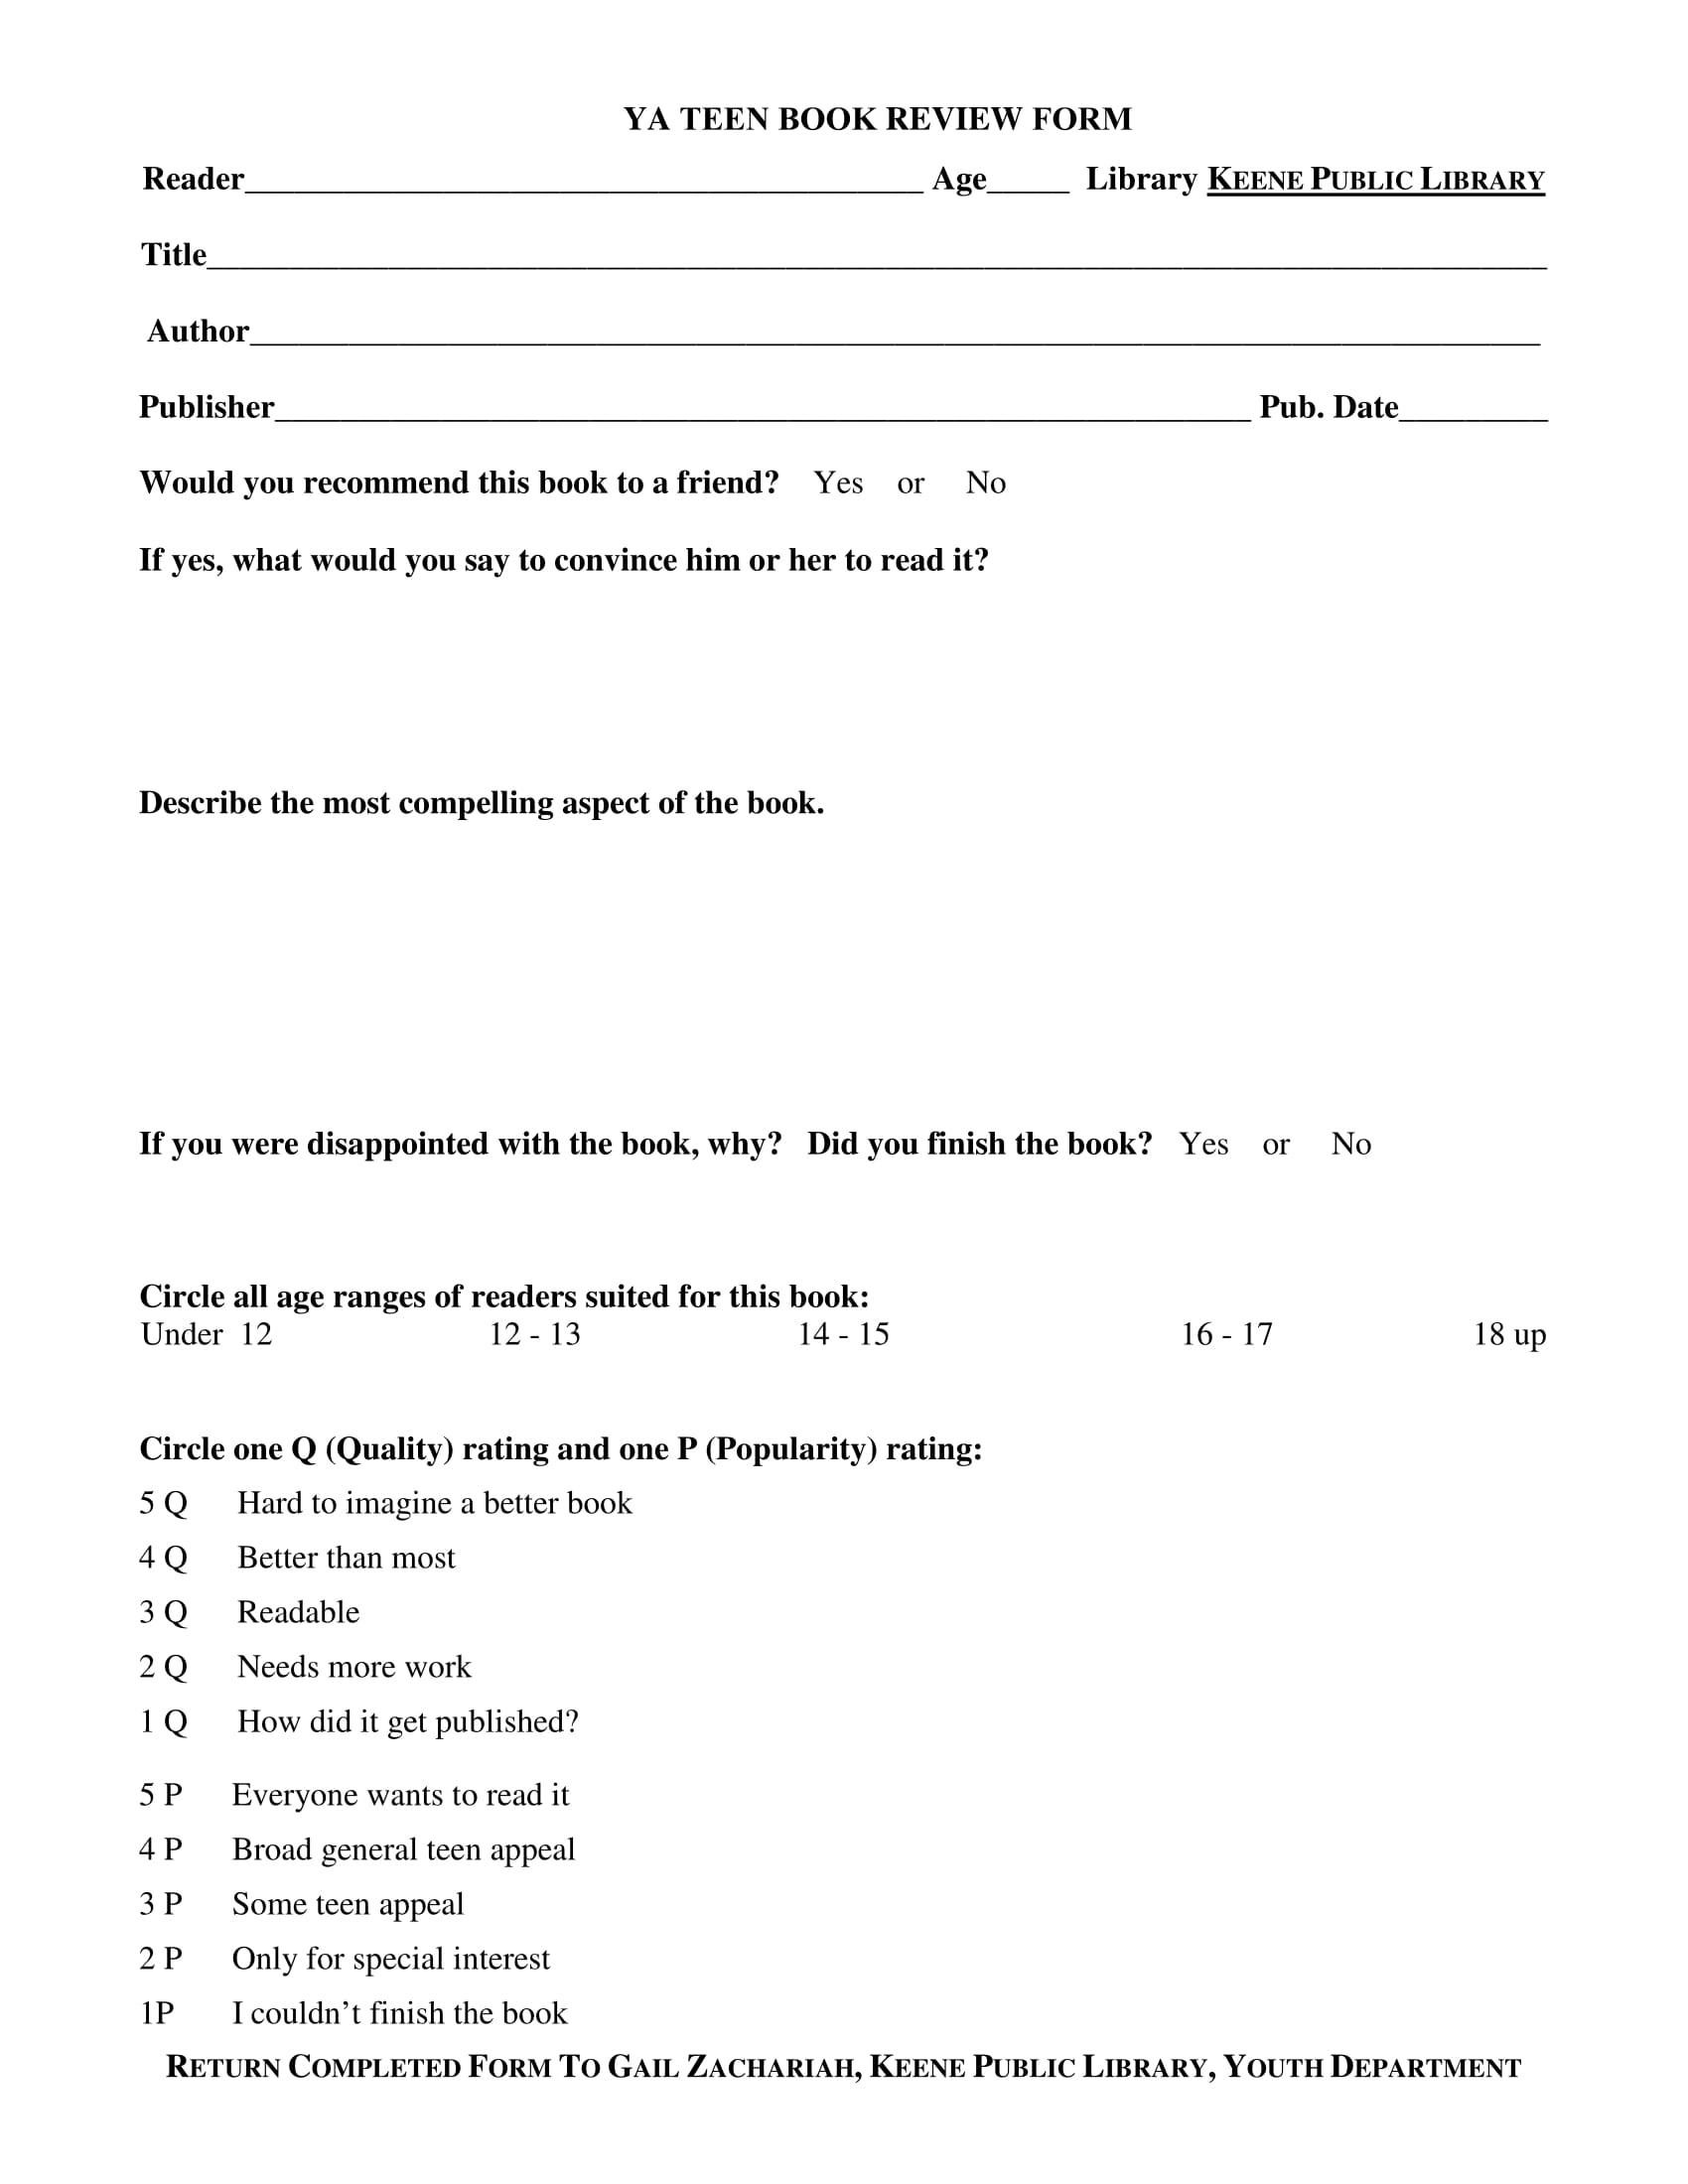 young adult book review evaluation form 1